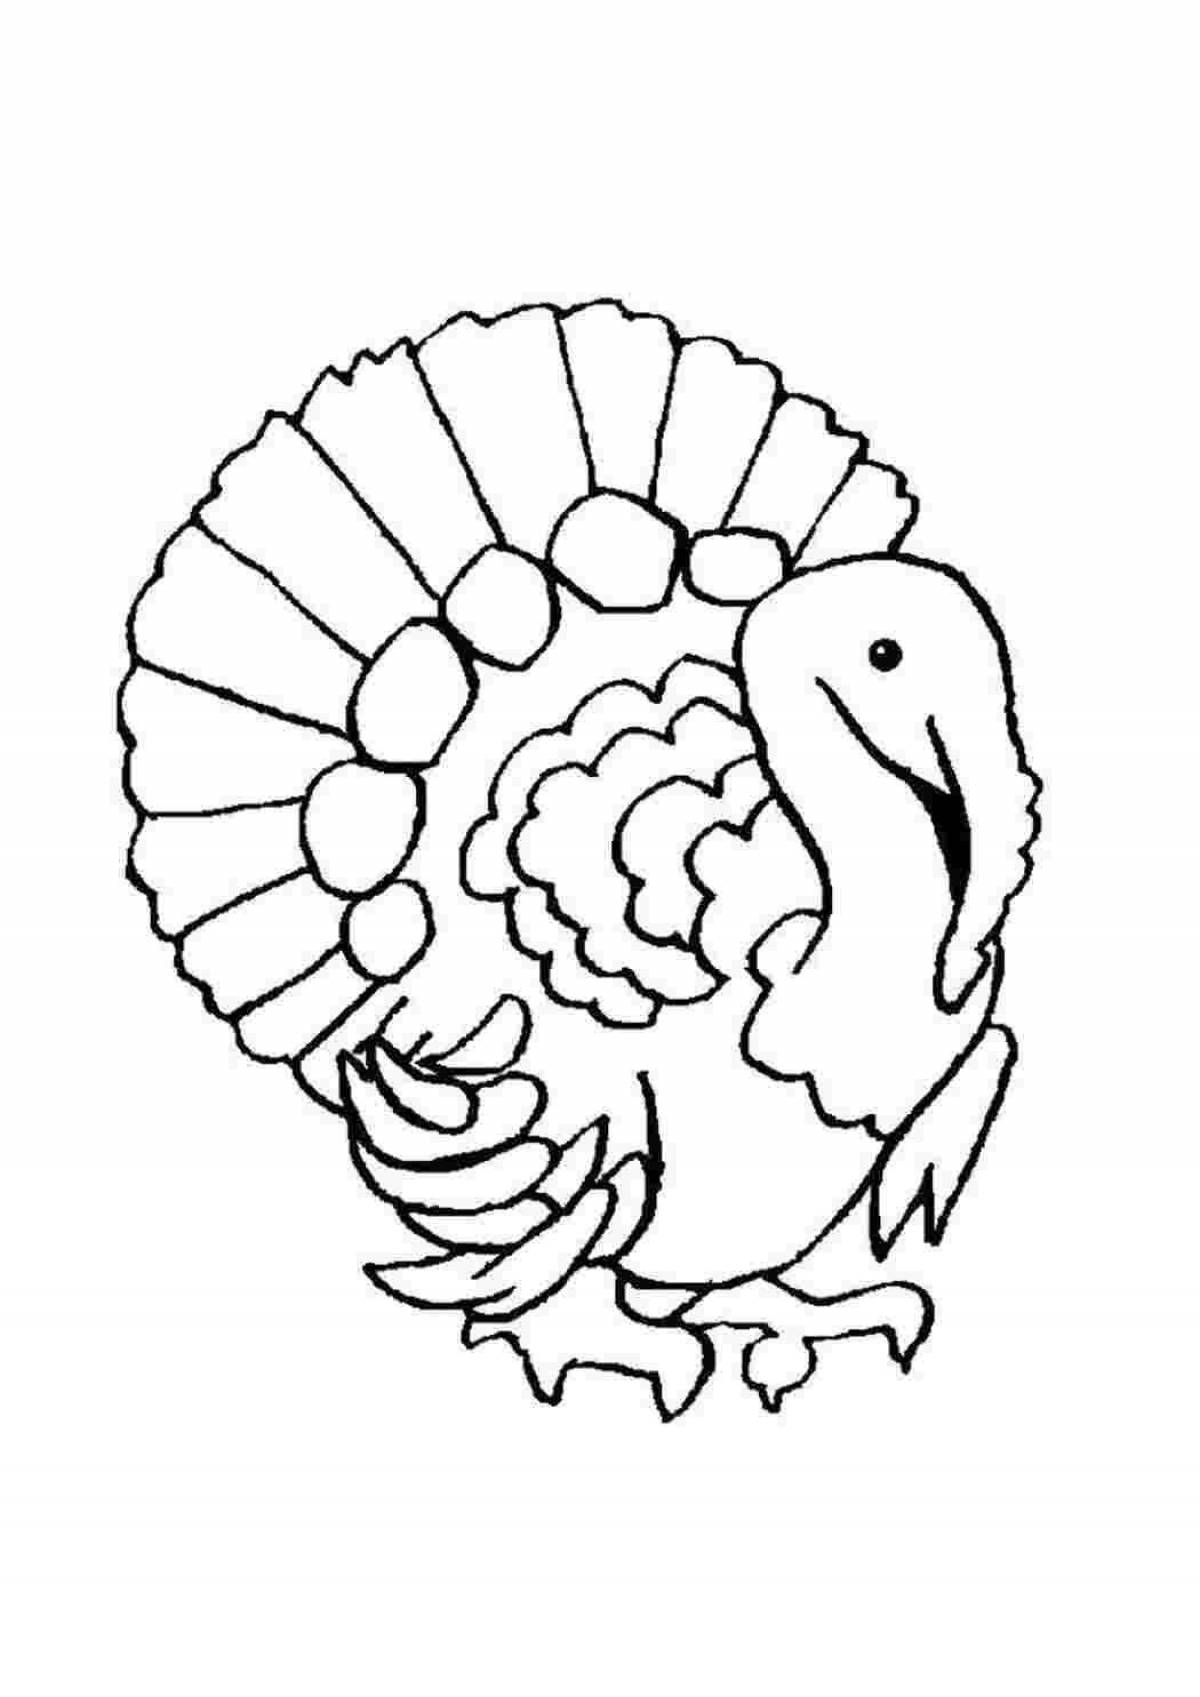 Playful Dymkovo turkey coloring book for kids